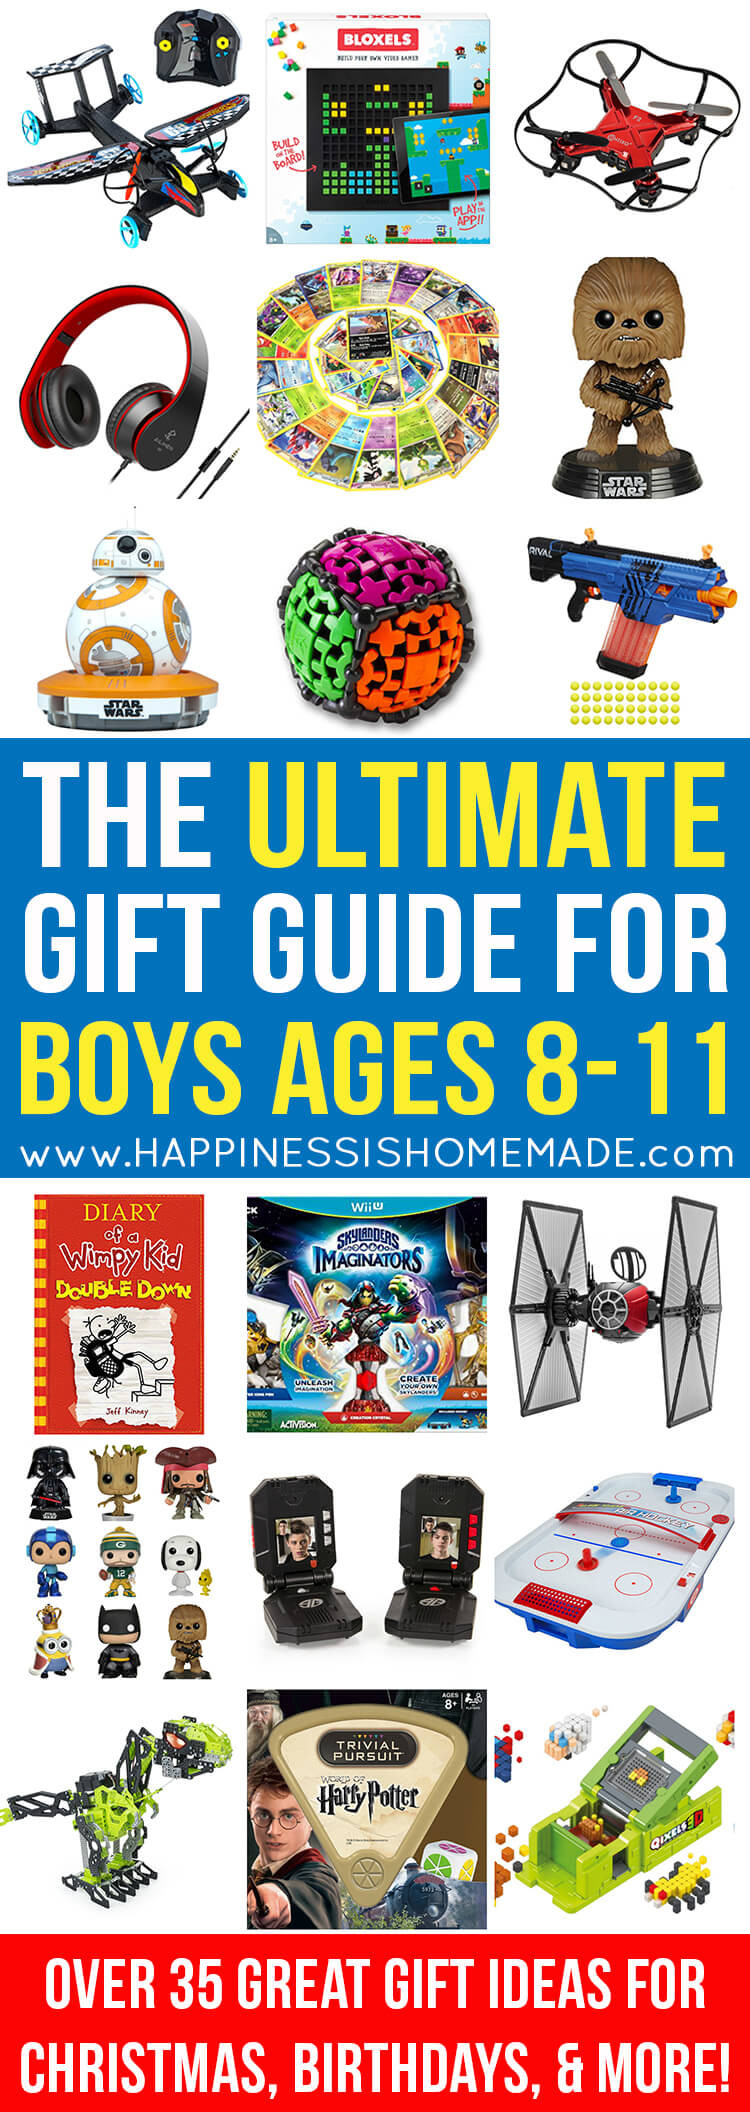 Best Gift Ideas For 8 Year Old Boy
 The Best Gift Ideas for Boys Ages 8 11 Happiness is Homemade